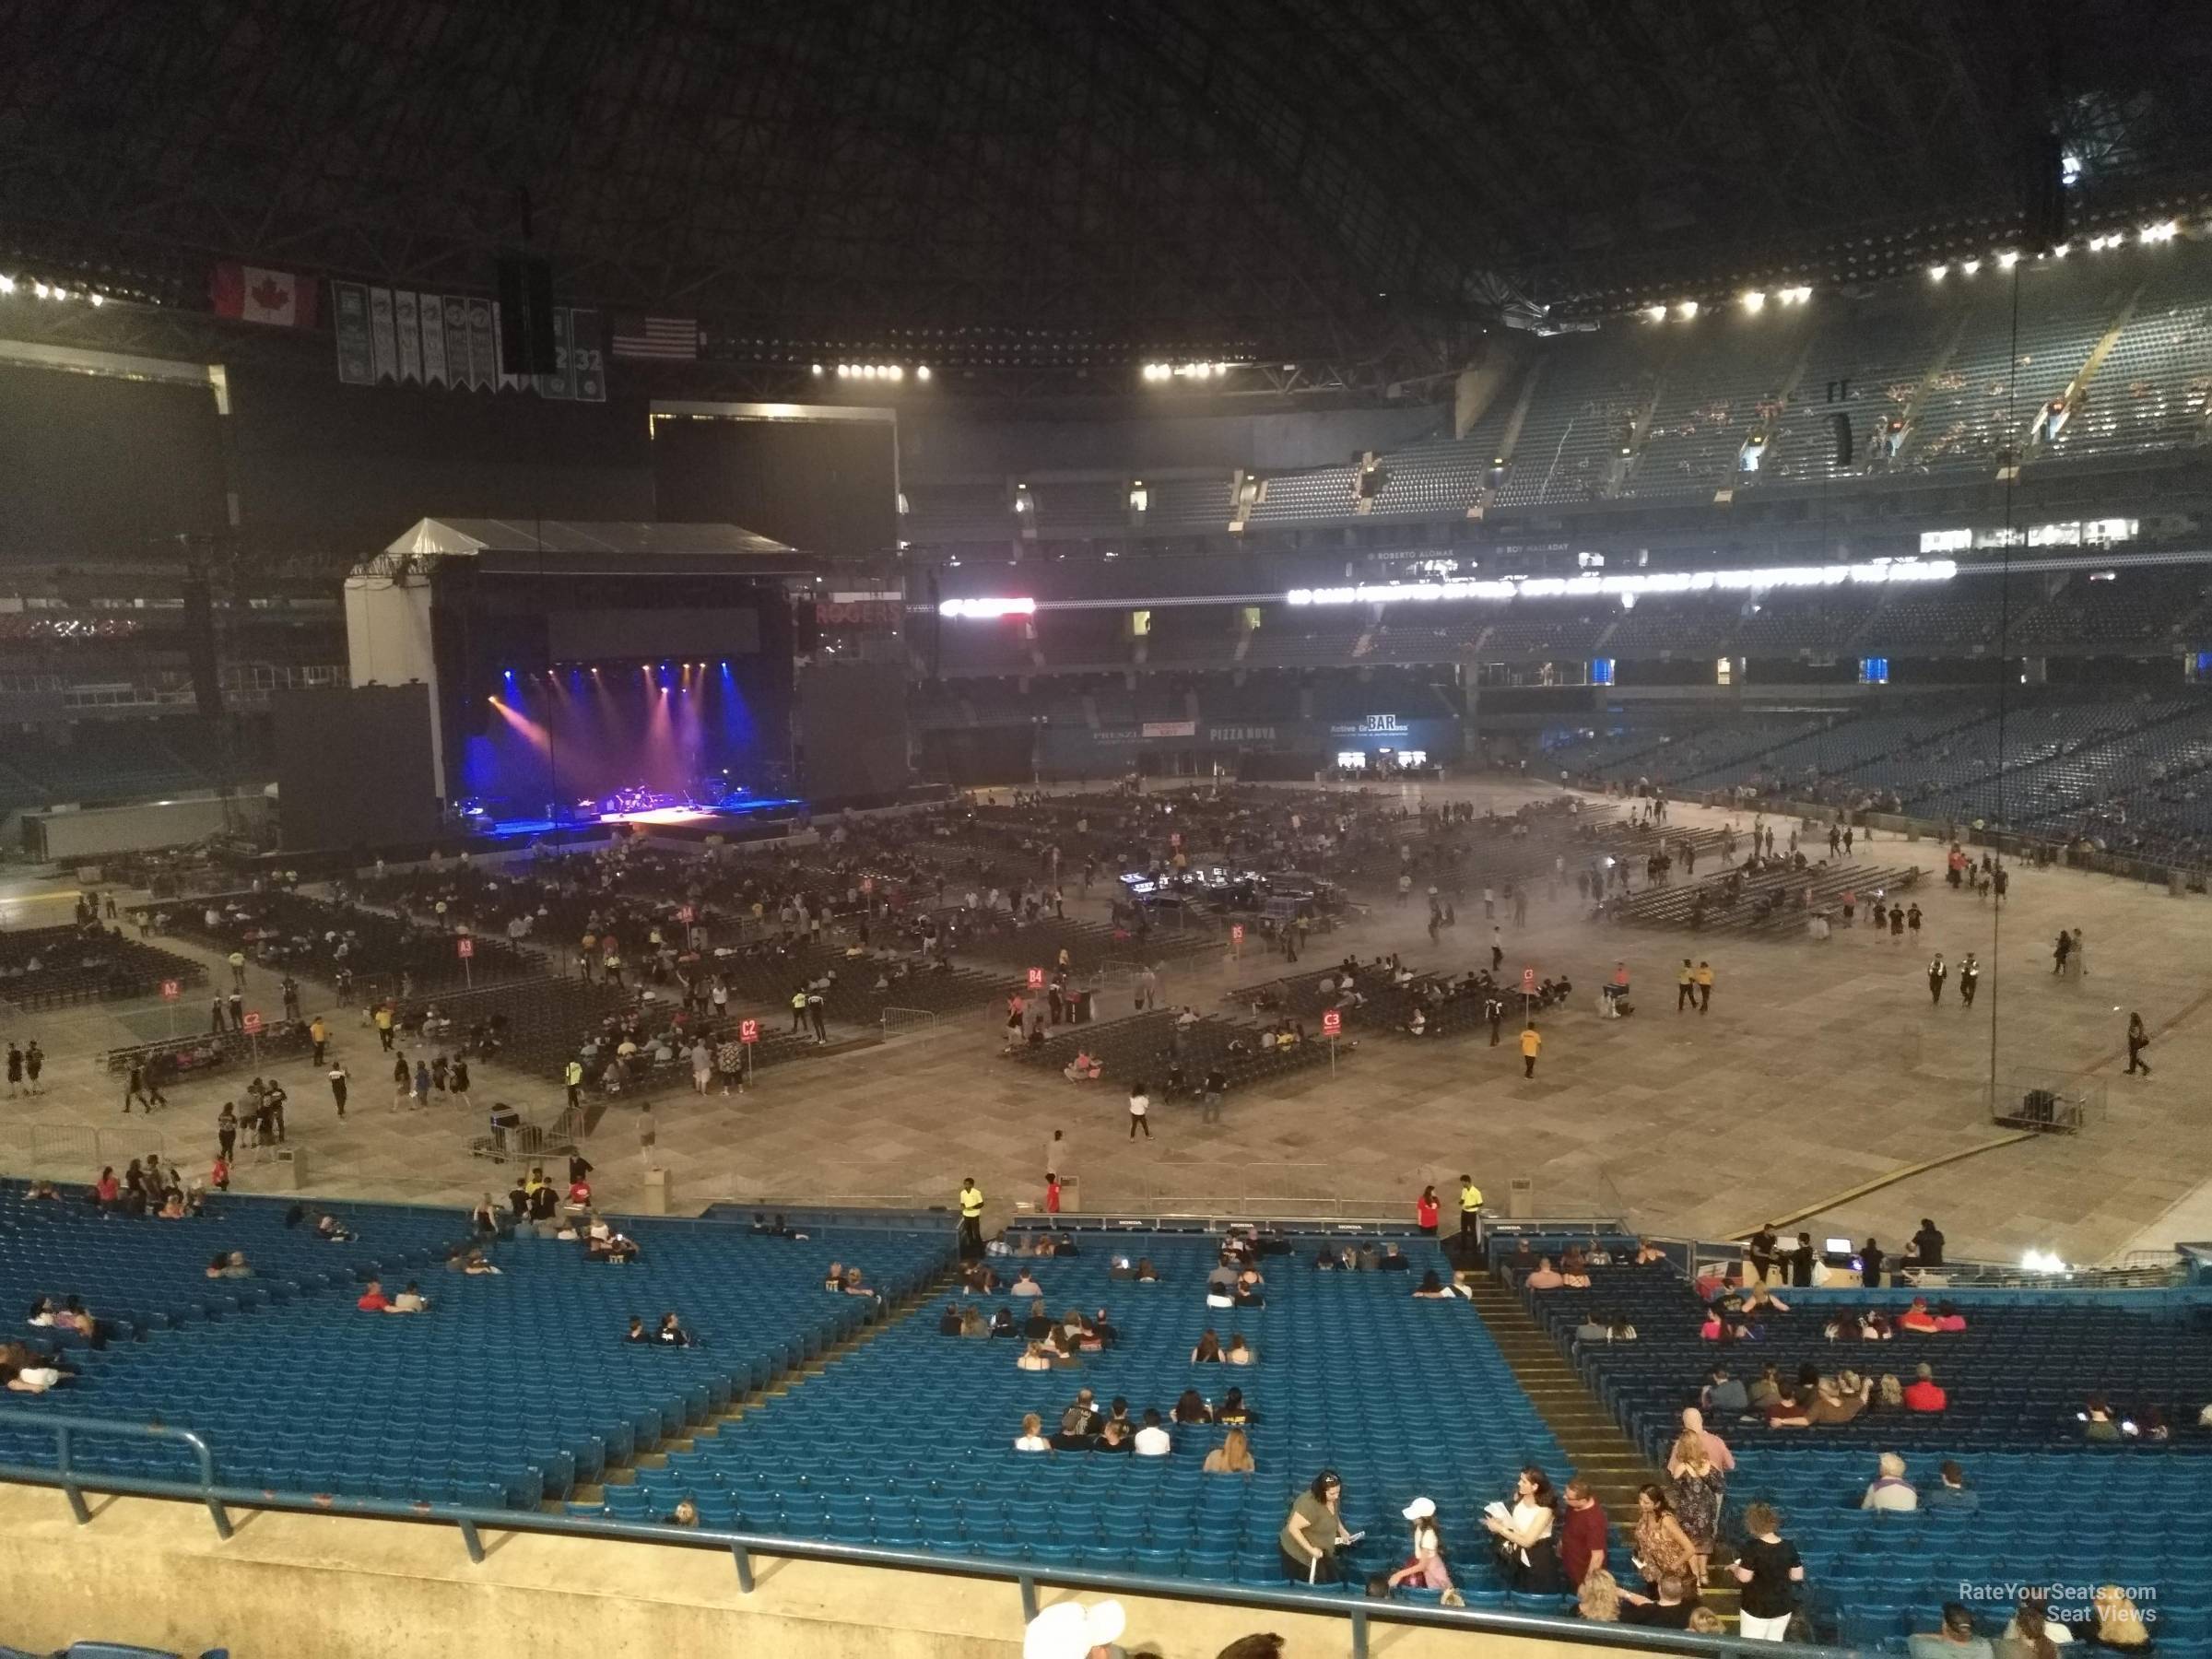 section 231, row 7 seat view  for concert - rogers centre